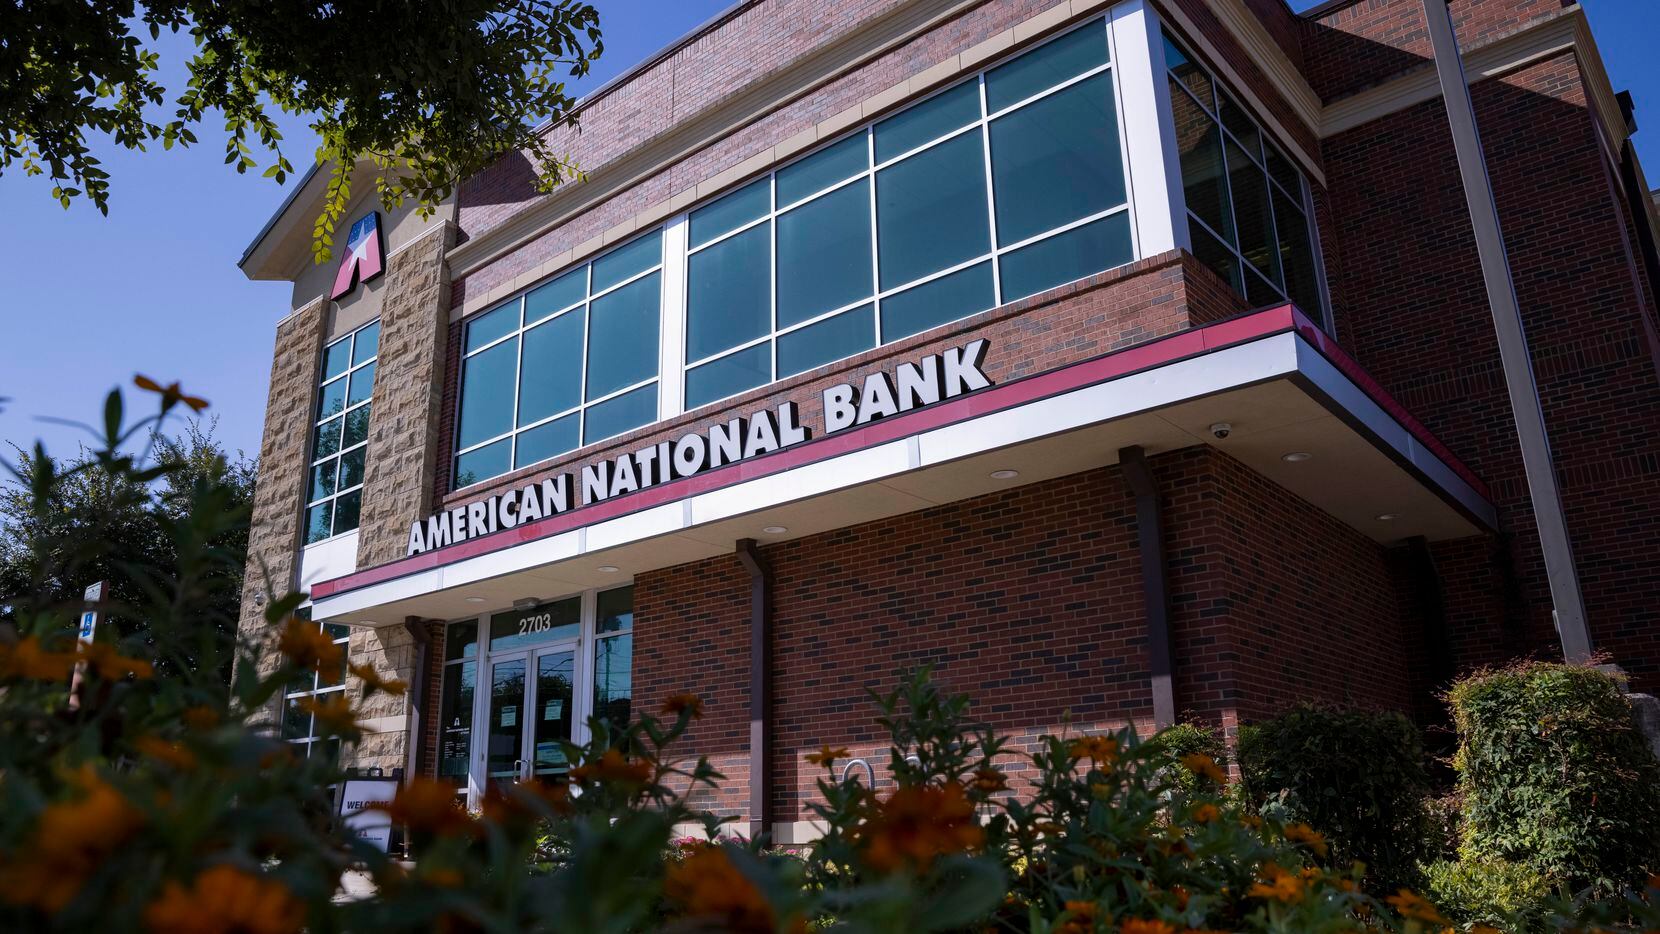 The American National Bank of Texas Oak Lawn branch.